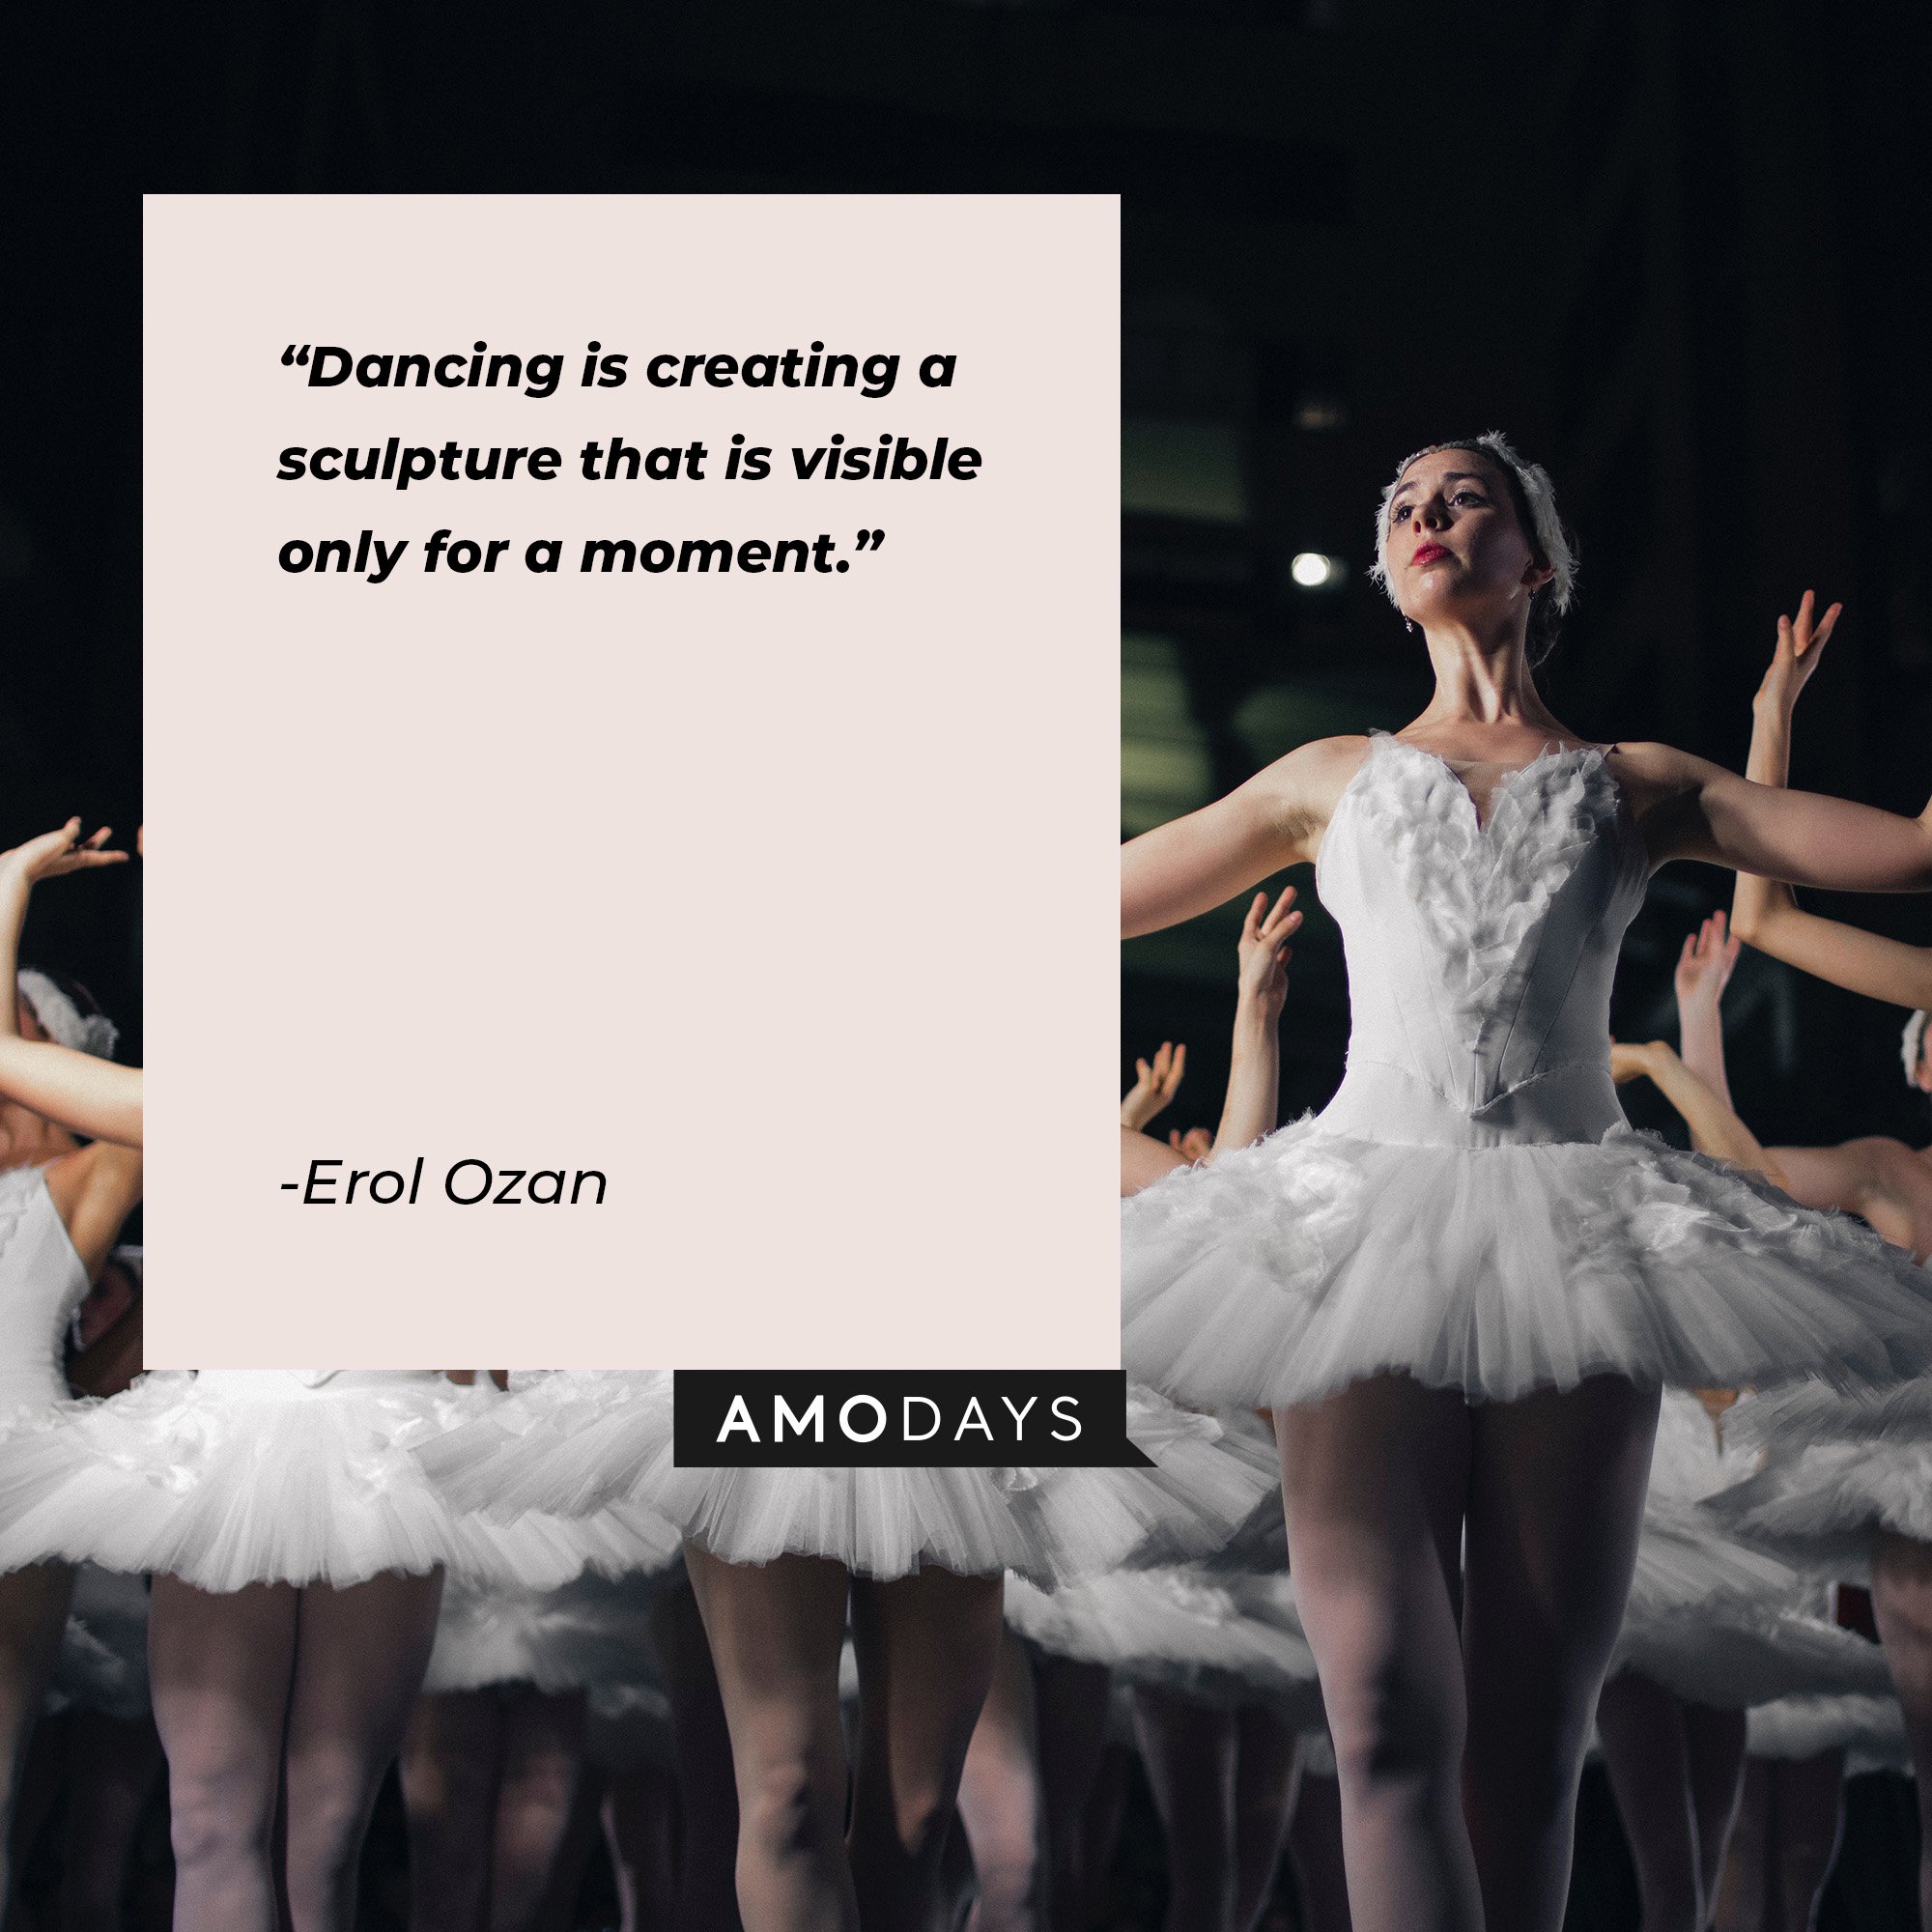  Erol Ozan’s quote: "Dancing is creating a sculpture that is visible only for a moment.” | Image: AmoDays 